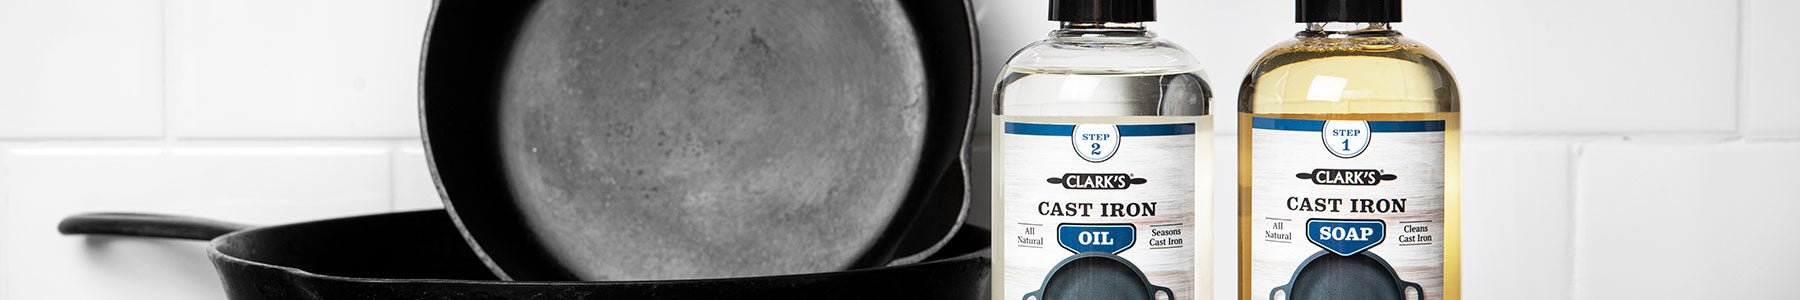 CLARK'S Cast Iron Seasoning Oil - With Fractionated Coconut Oil – Clark's  Online Store